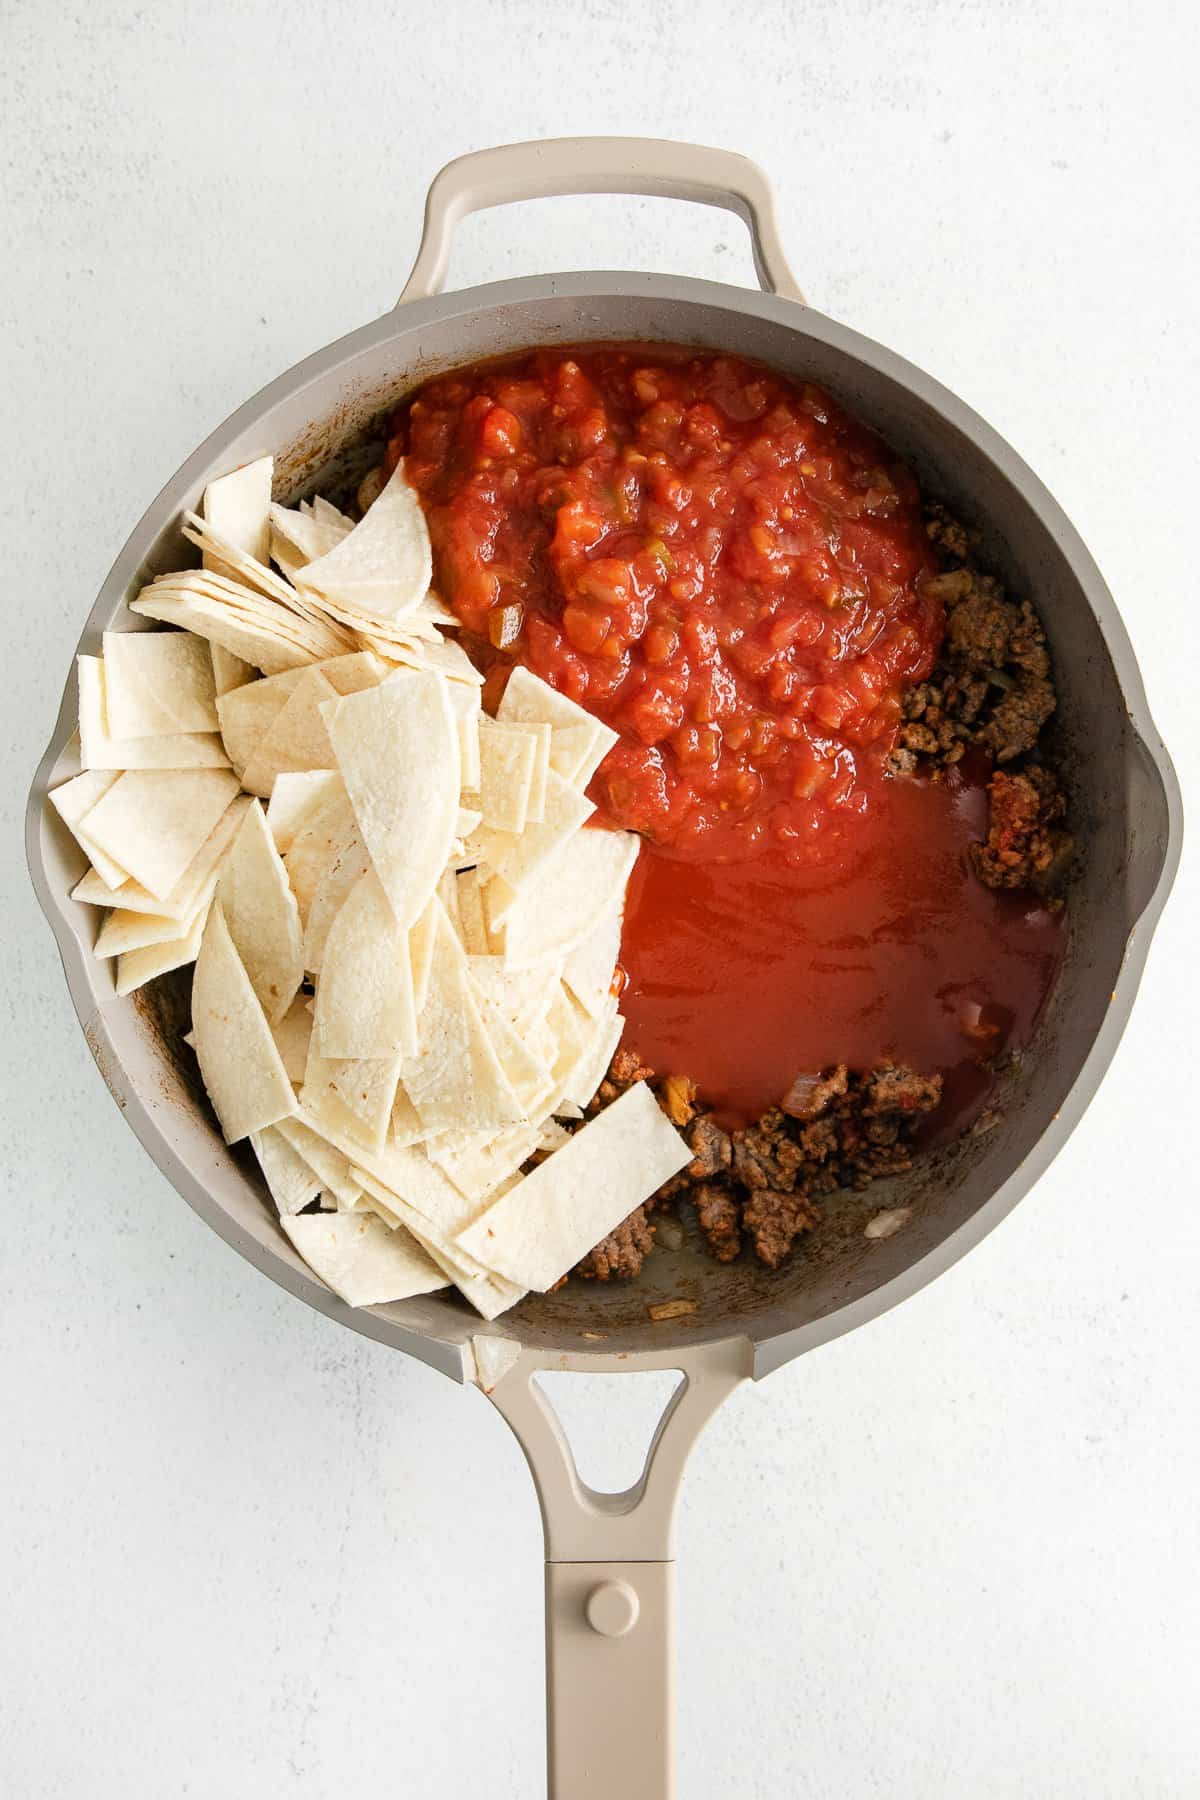 Salsa and tortillas in a skillet for taco bake.